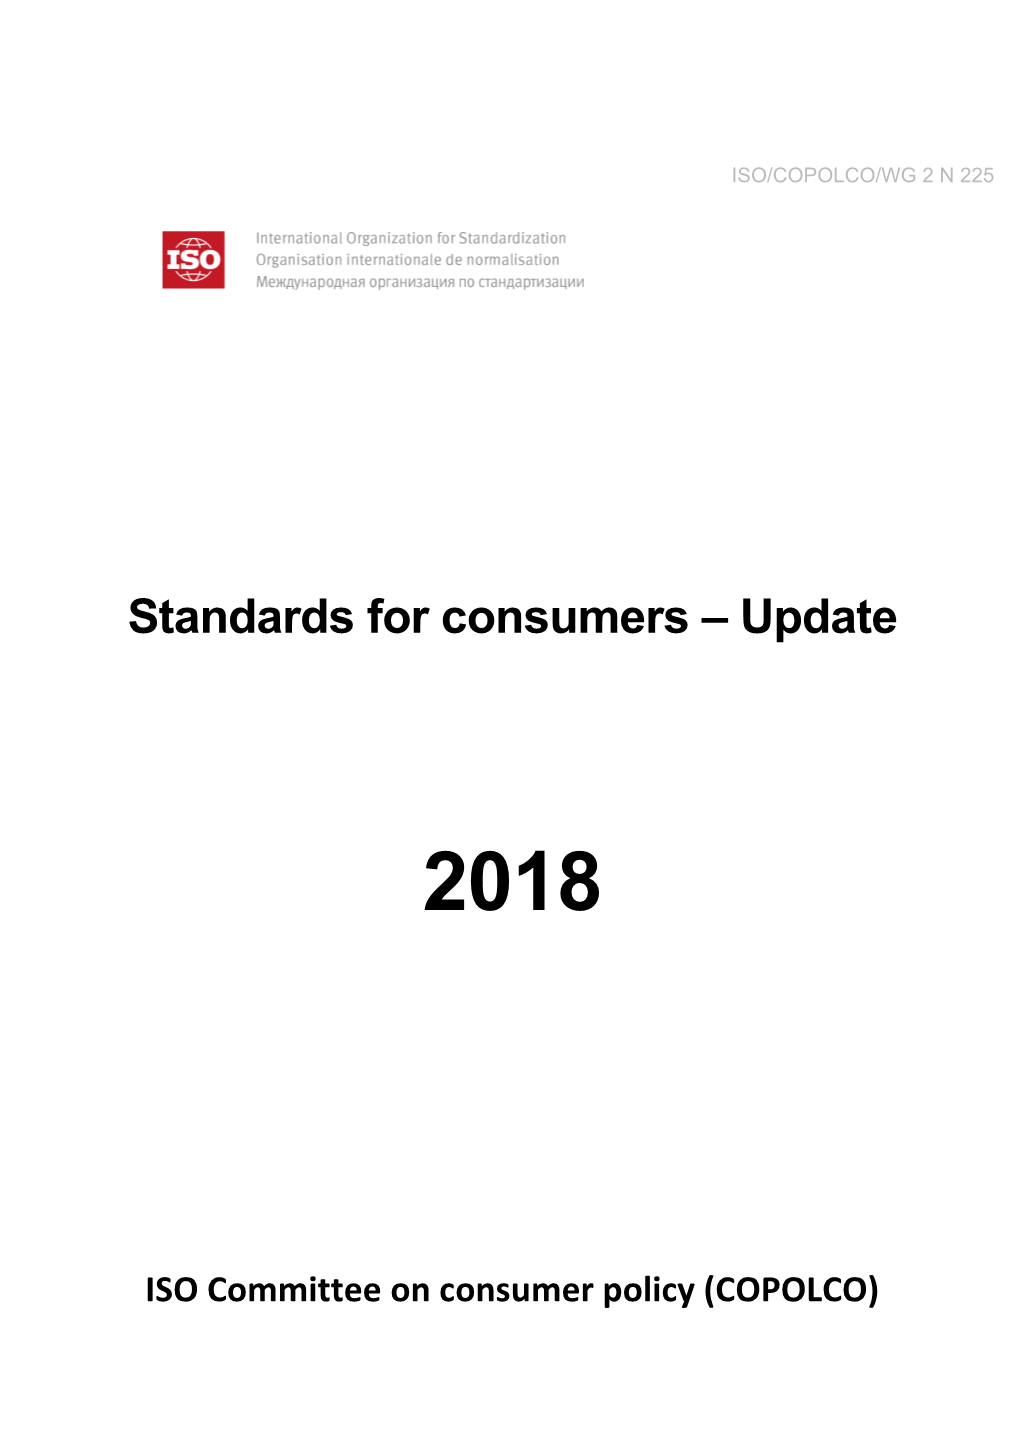 Standards for Consumers – Update